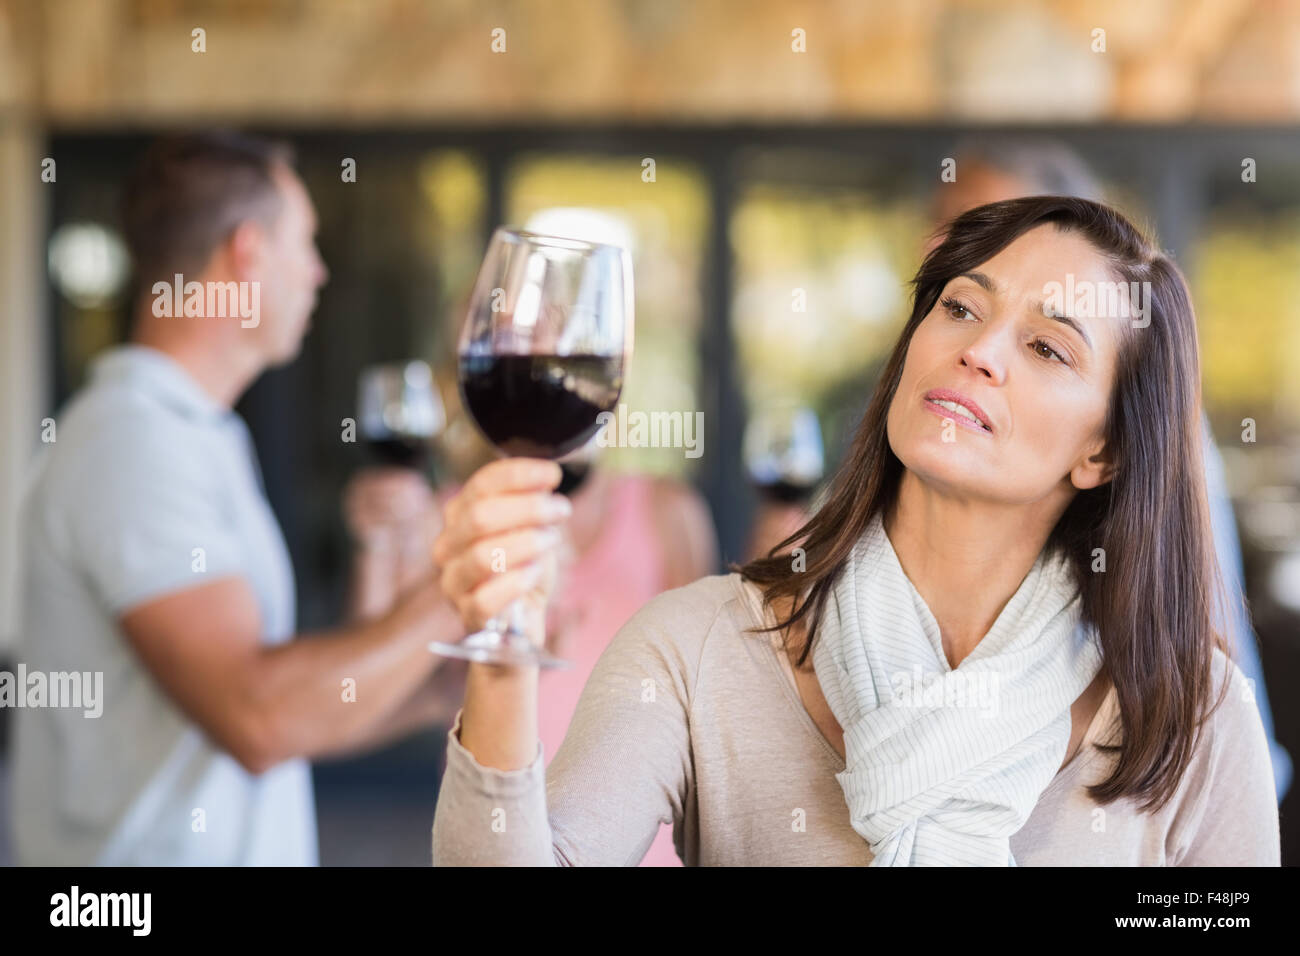 Brunette woman looking at wine in front of group doing wine tasting Stock Photo